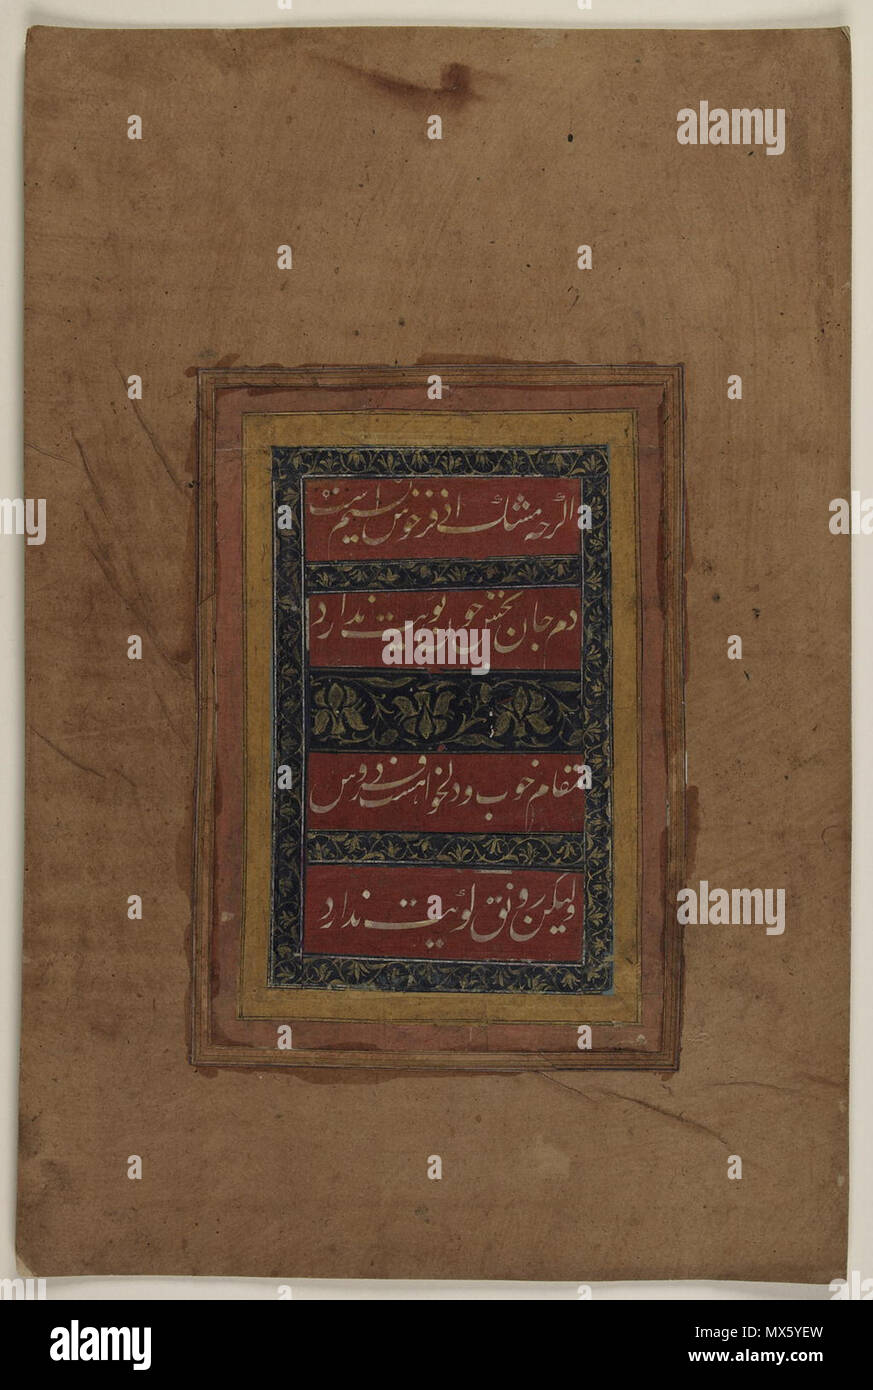 . English: Calligraphic fragment executed in nasta'liq script in white ink on red background. It includes four lines of Persian poetry describing the heavenly scent and life-endowing capabilities of the beloved. The verses read: Agar cha mushk-i az far khush nasim ast / Dam-i jan bakhsh chun buyat nadarad / Maqam-i khub u dilkhwah-st firdaws / Valikin runaq-i kuyat nadarad ('Although musk smells fragrant / It does not breathe life like your scent / Paradise is a good and beloved place / But it is not as splendid as your abode'). Blue panels decorated with gold flower and leaf motifs separate a Stock Photo